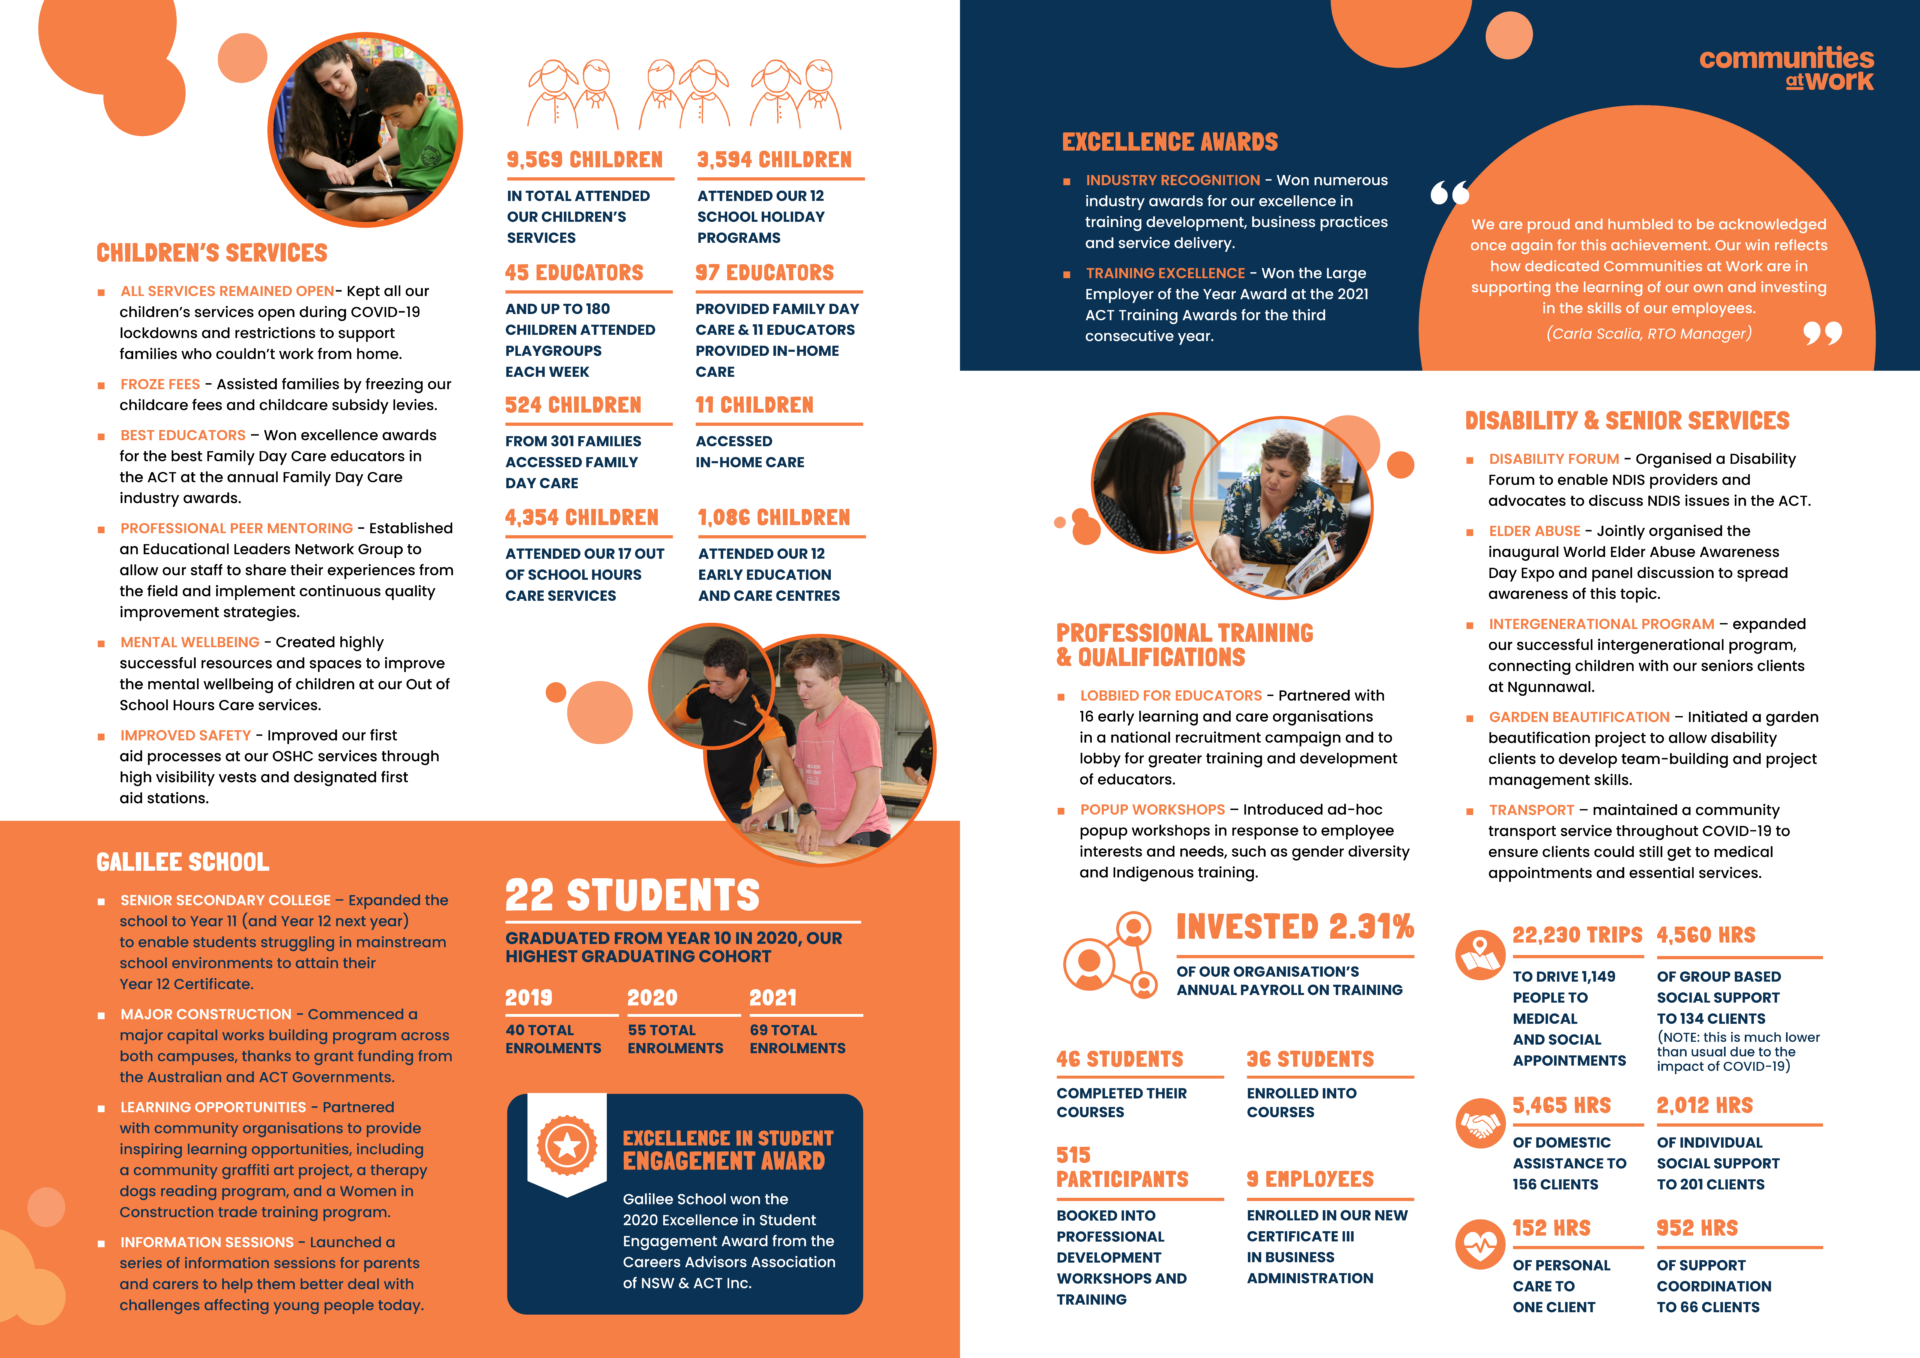 2020-21 Communities at Work Annual Report Highlights 2